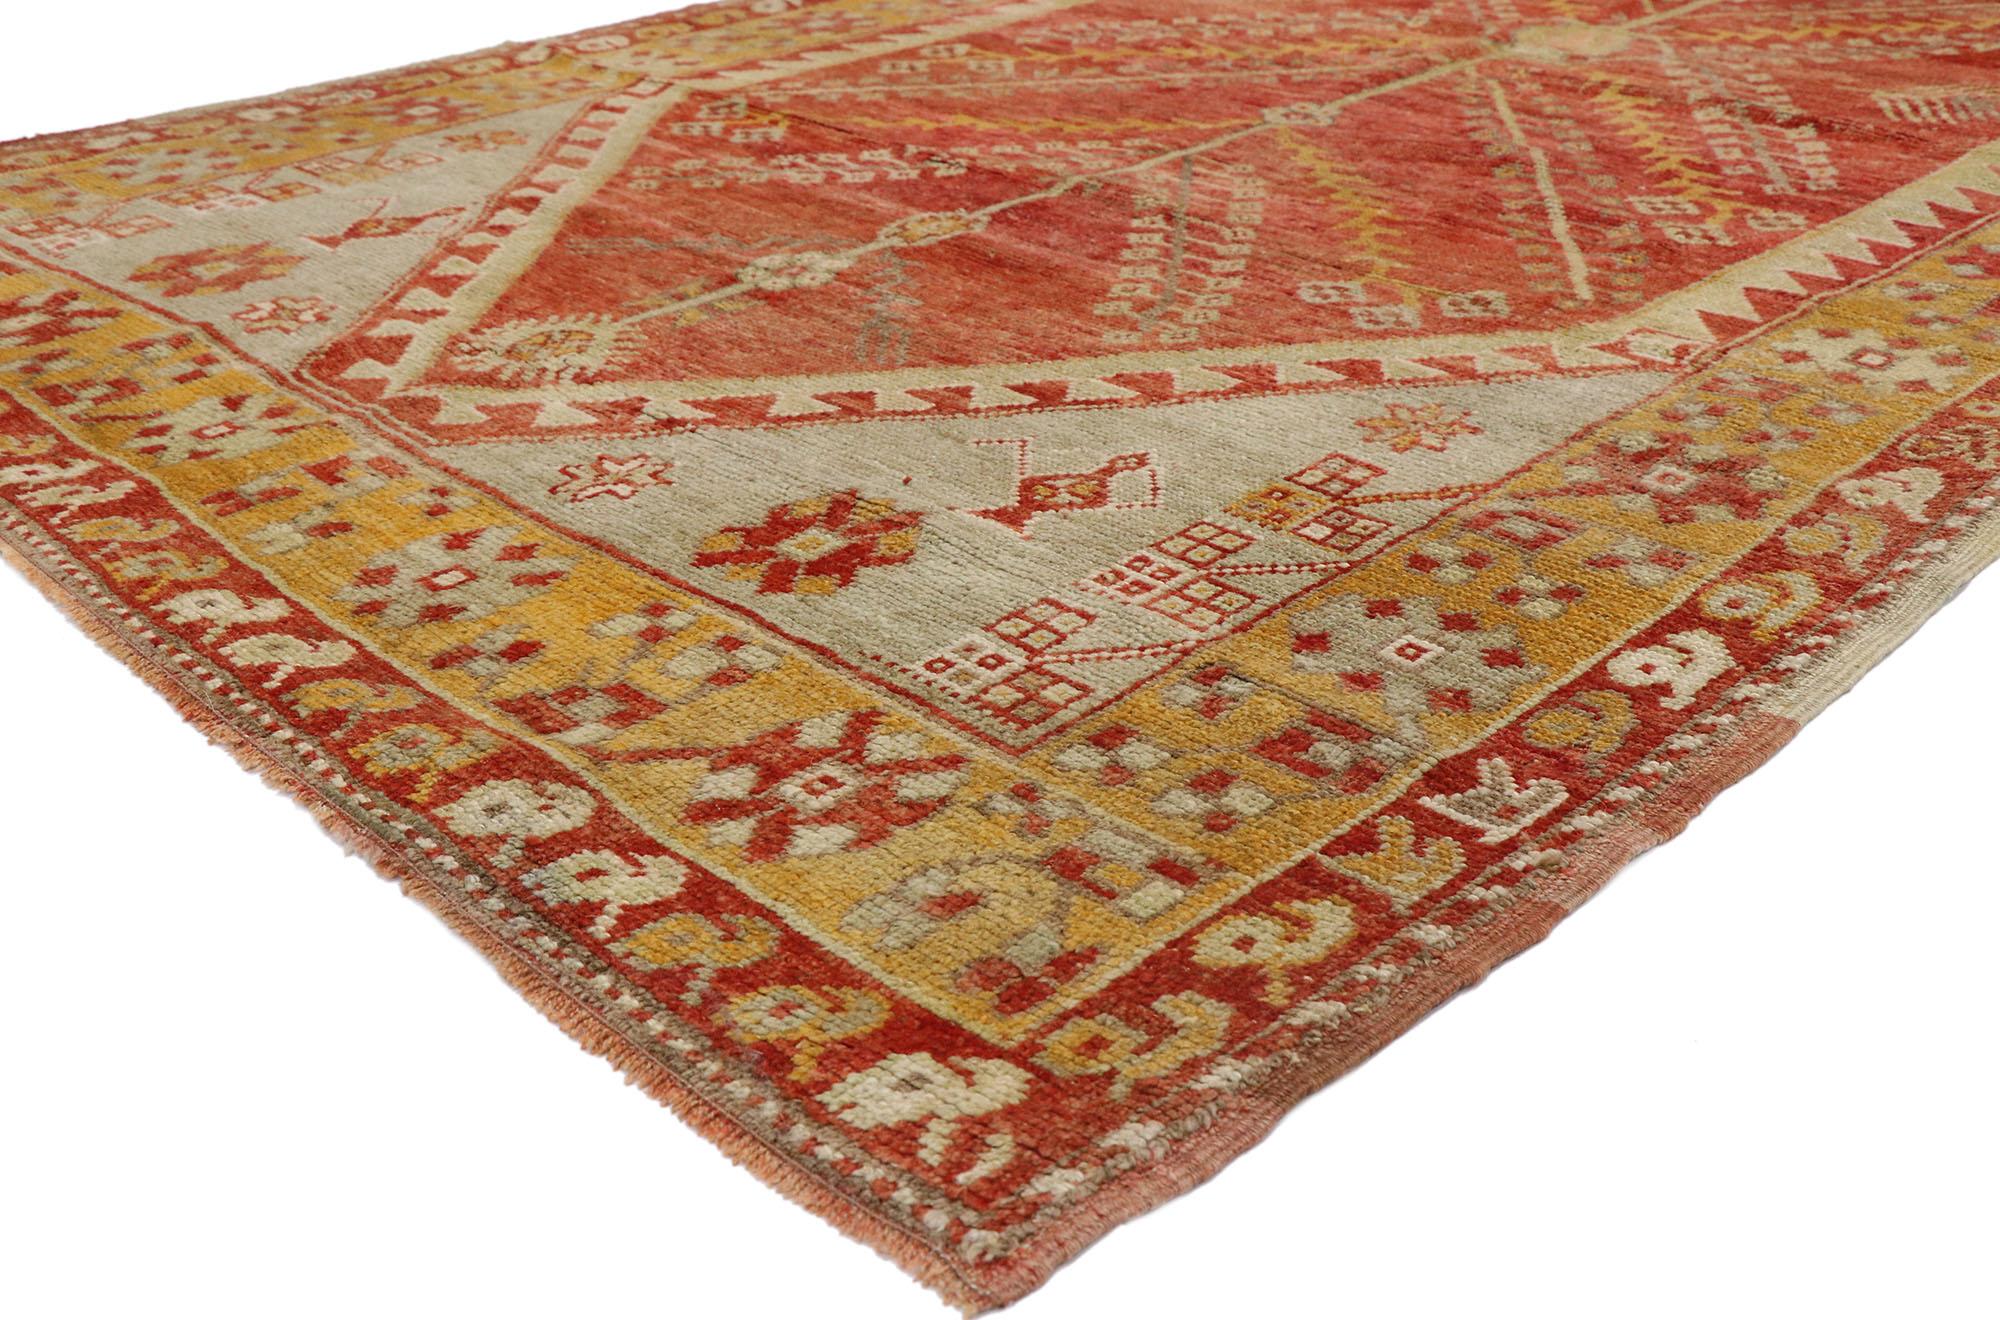 52752, vintage Turkish Oushak rug with Modern Northwestern Style 05'02 x 09'01. This hand knotted wool vintage Turkish Oushak rug features a pole medallion with extended tree of life symbols and comb motifs on an abrashed red field outlined with a